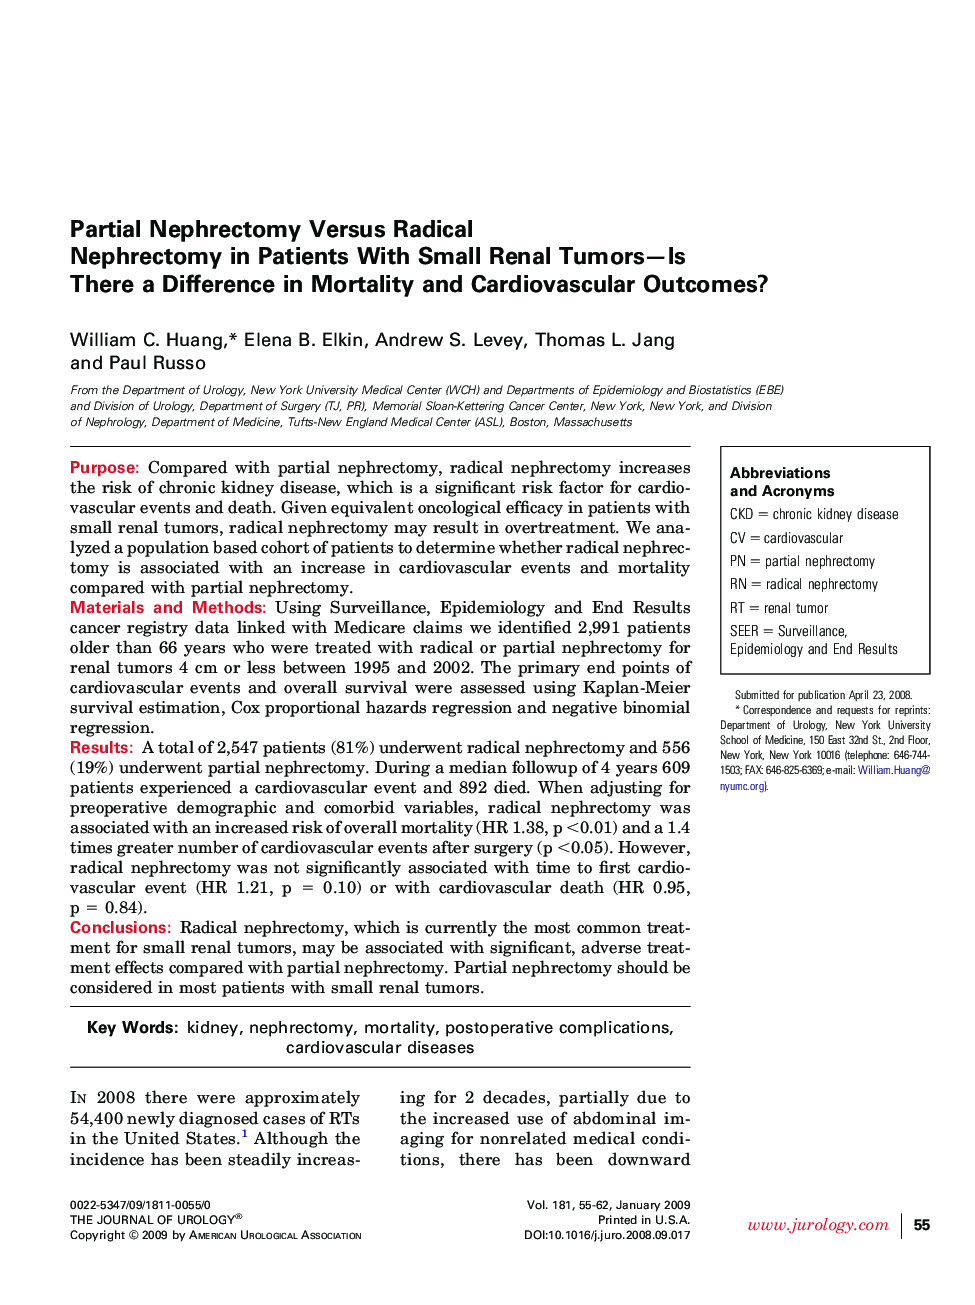 Partial Nephrectomy Versus Radical Nephrectomy in Patients With Small Renal Tumors—Is There a Difference in Mortality and Cardiovascular Outcomes?